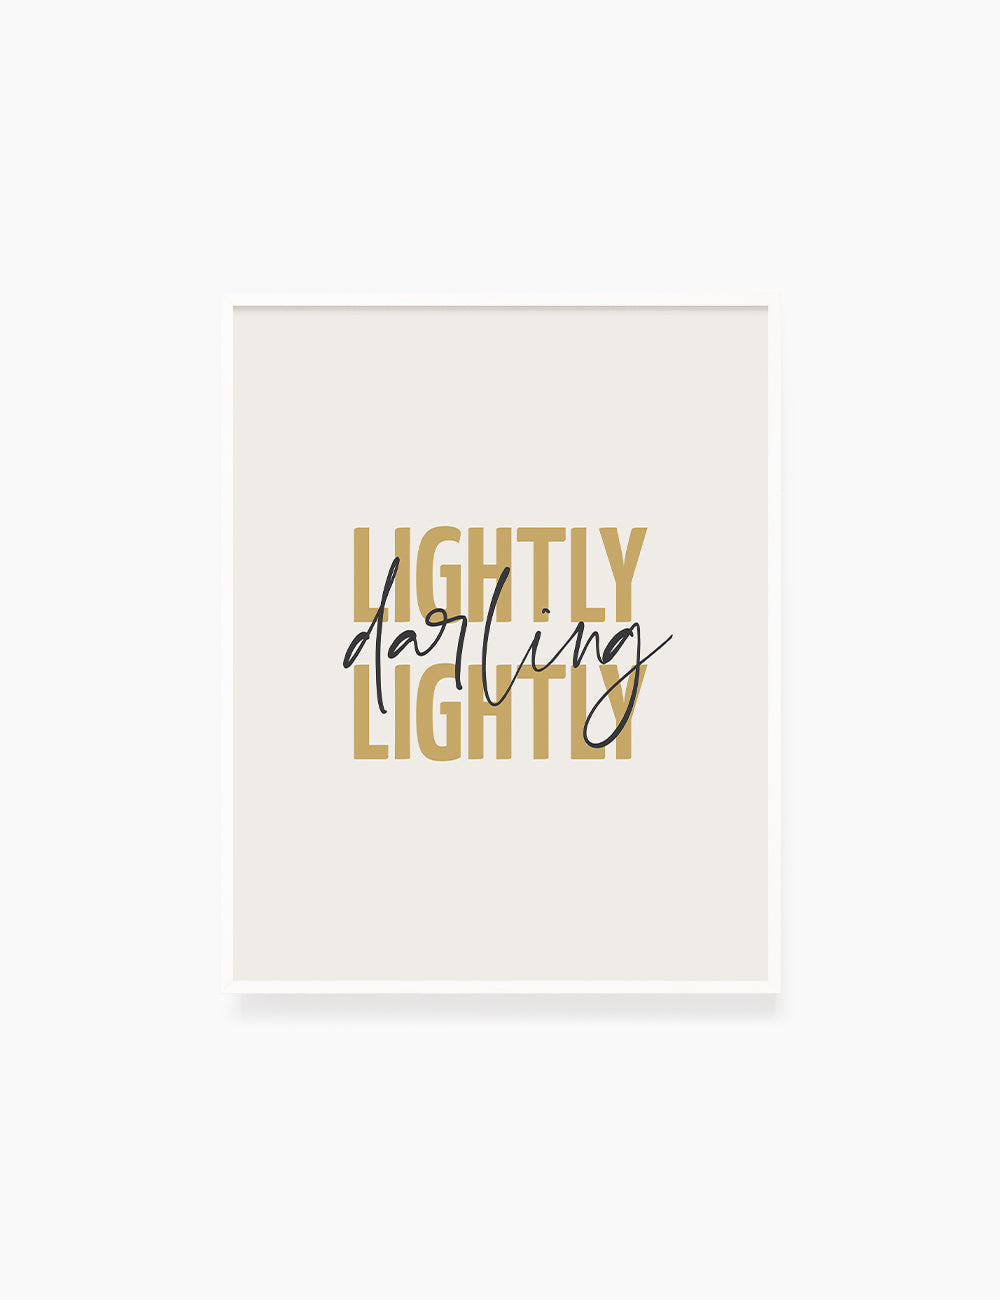 LIGHTLY, DARLING, LIGHTLY. Yellow Gold. Inspirational quote. Words to live by. Printable Wall Art Quote. - PAPER MOON Art & Design